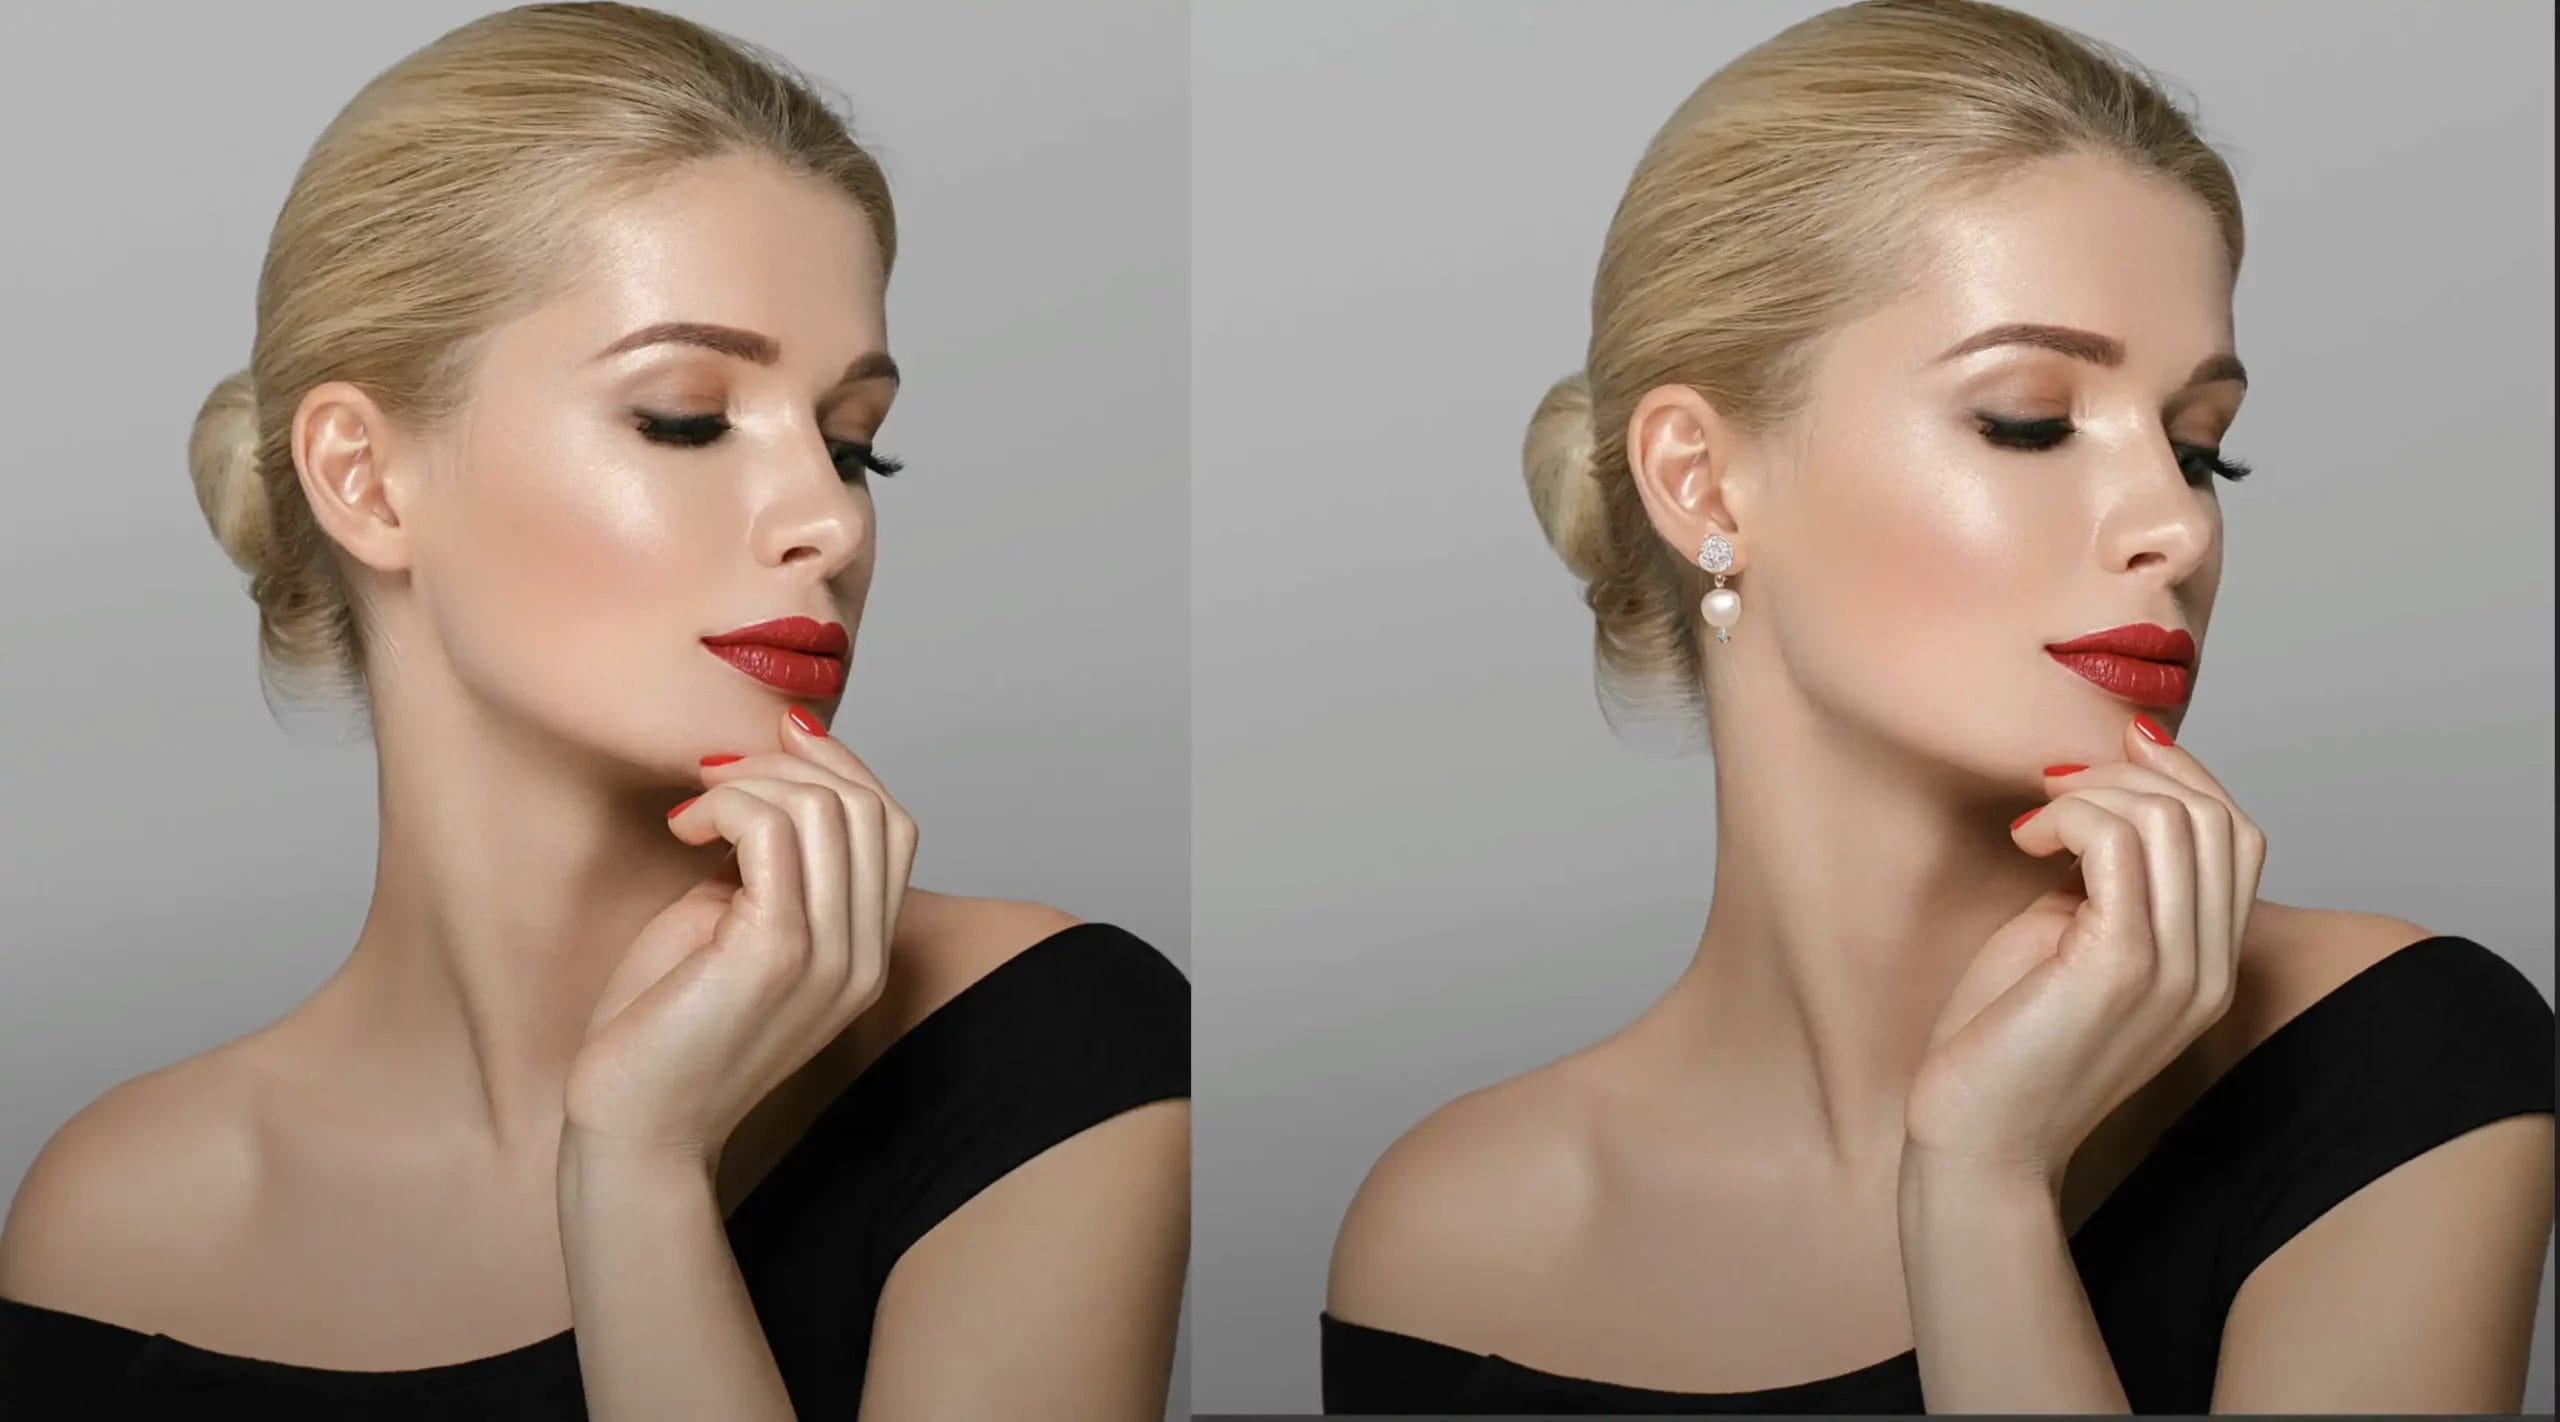 Portrait of a blond female with red lips in a black dress in Luminar Neo